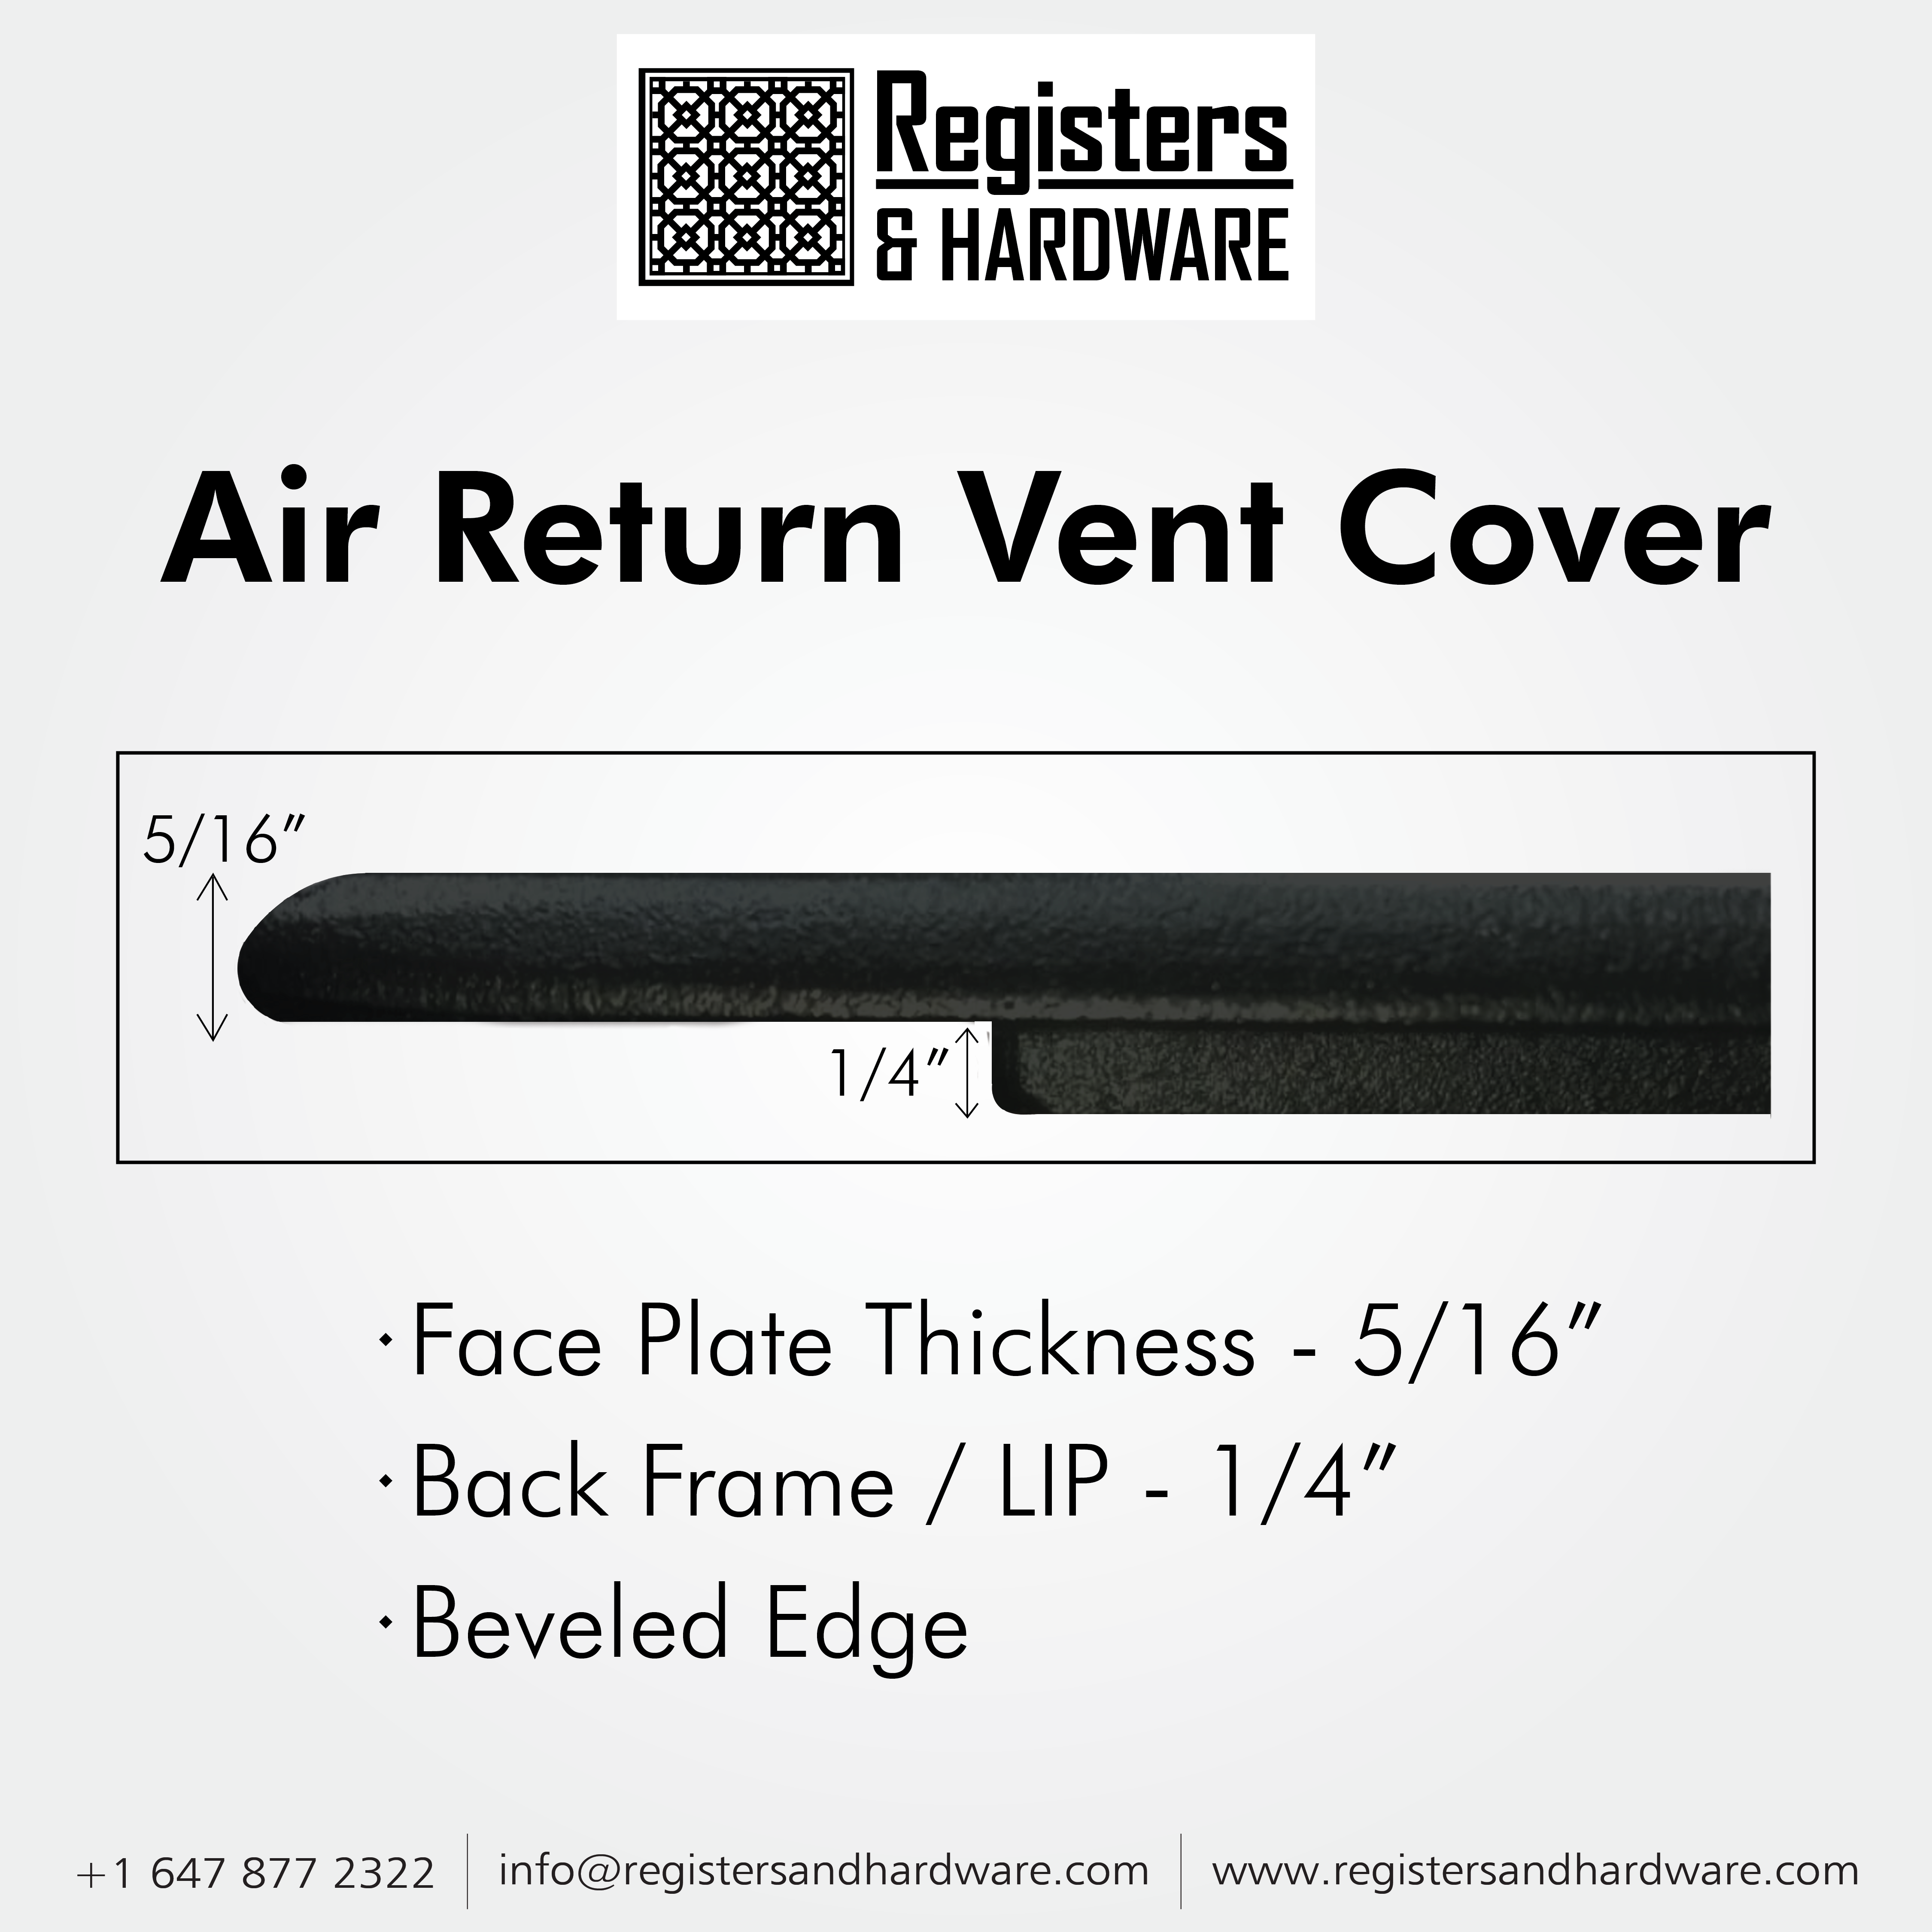 Achtek AIR RETURN 8"x22" Duct Opening (Overall Size 10"x24") | Heavy Cast Aluminum Air Grille HVAC Duct || Powder Coated